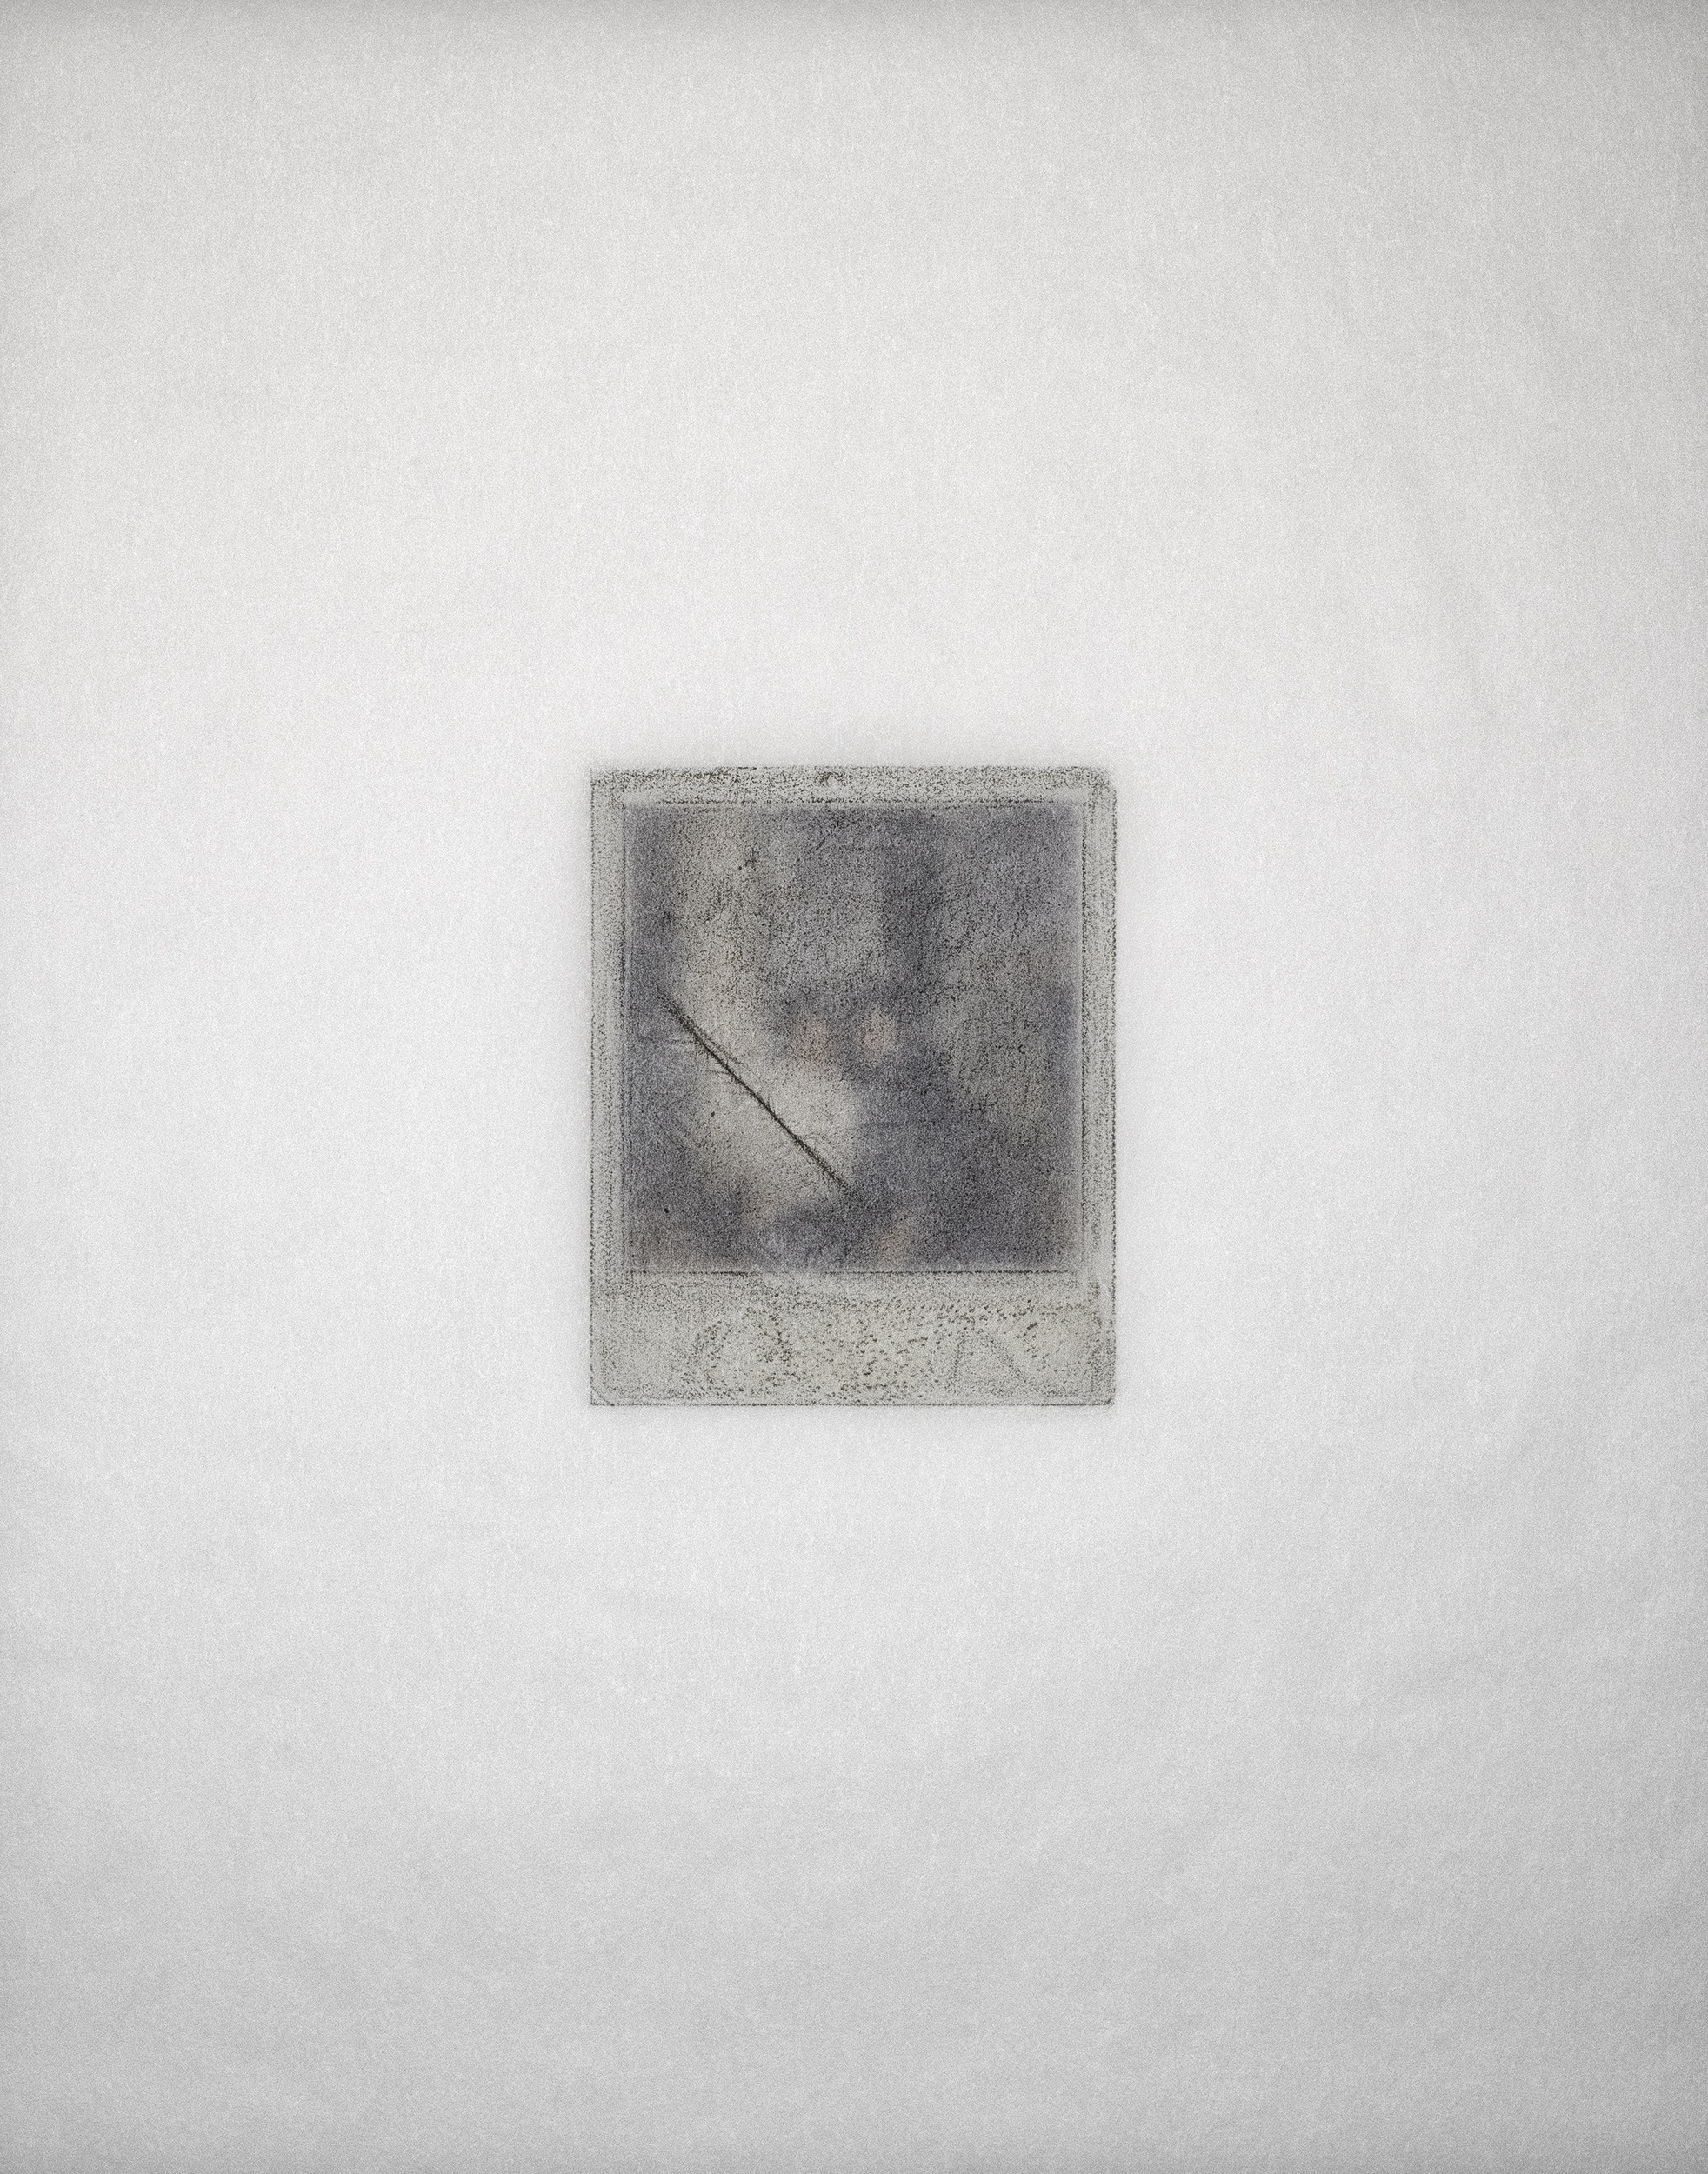 Diffusion Transfer (Two of Four Sisters), 1948 – 2008